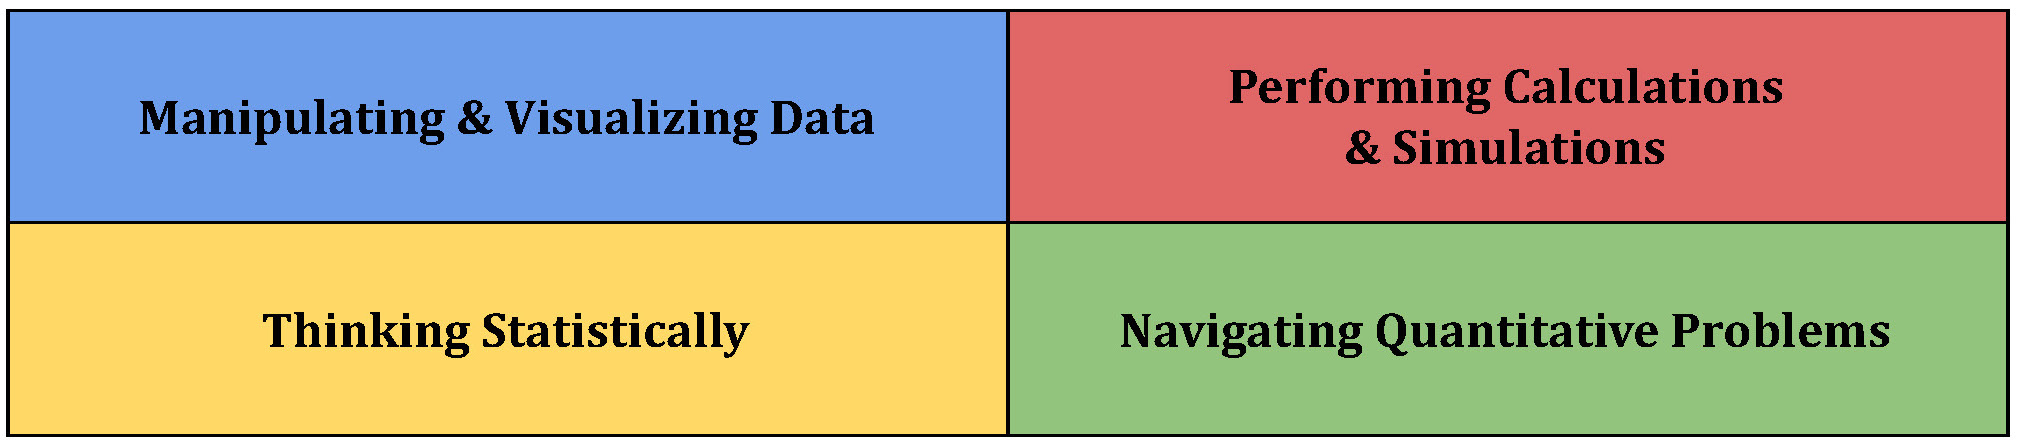 The four learning goals illustrated in a grid: "Manipulating & Visiualizing Data" in blue in the top left, "Performing Calculations and Simulations" in red in the top right, "Thinking Statistically" in yellow in the bottom left, and "Navigating Quantitative Problems" in green in the bottom right.